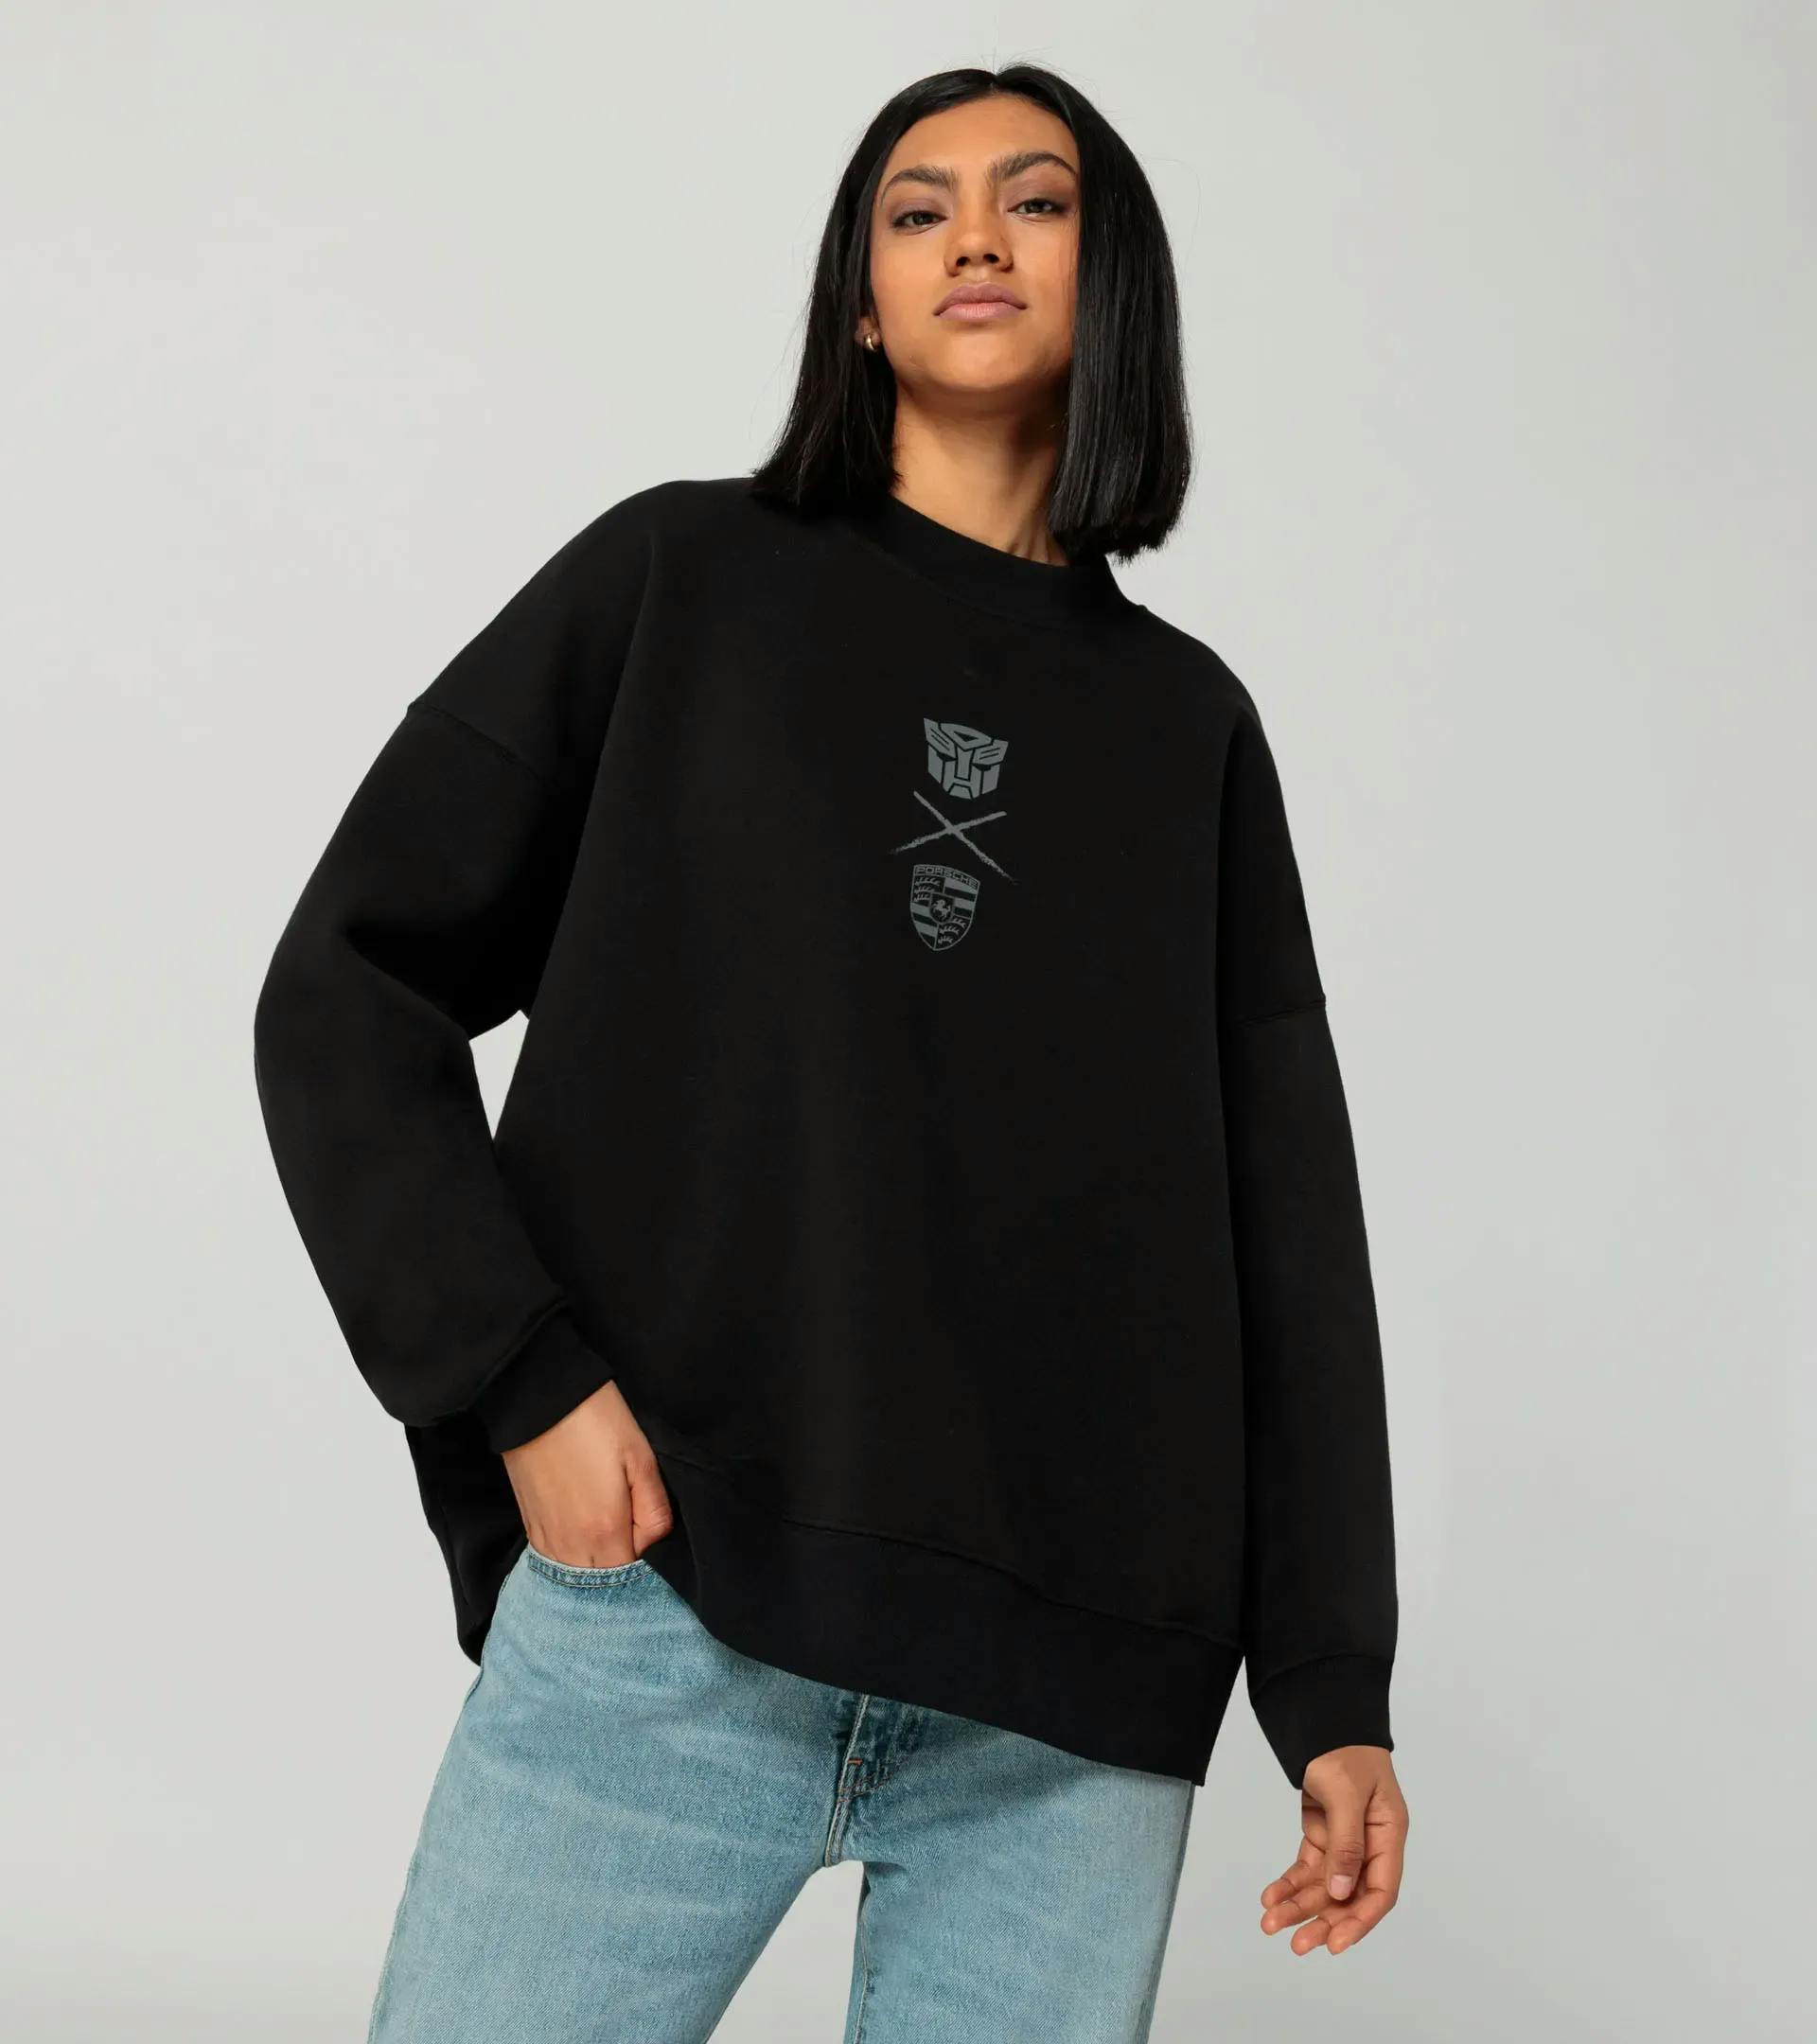 Same Day Delivery Items Prime Oversized Sweatshirt Crew Neck Long